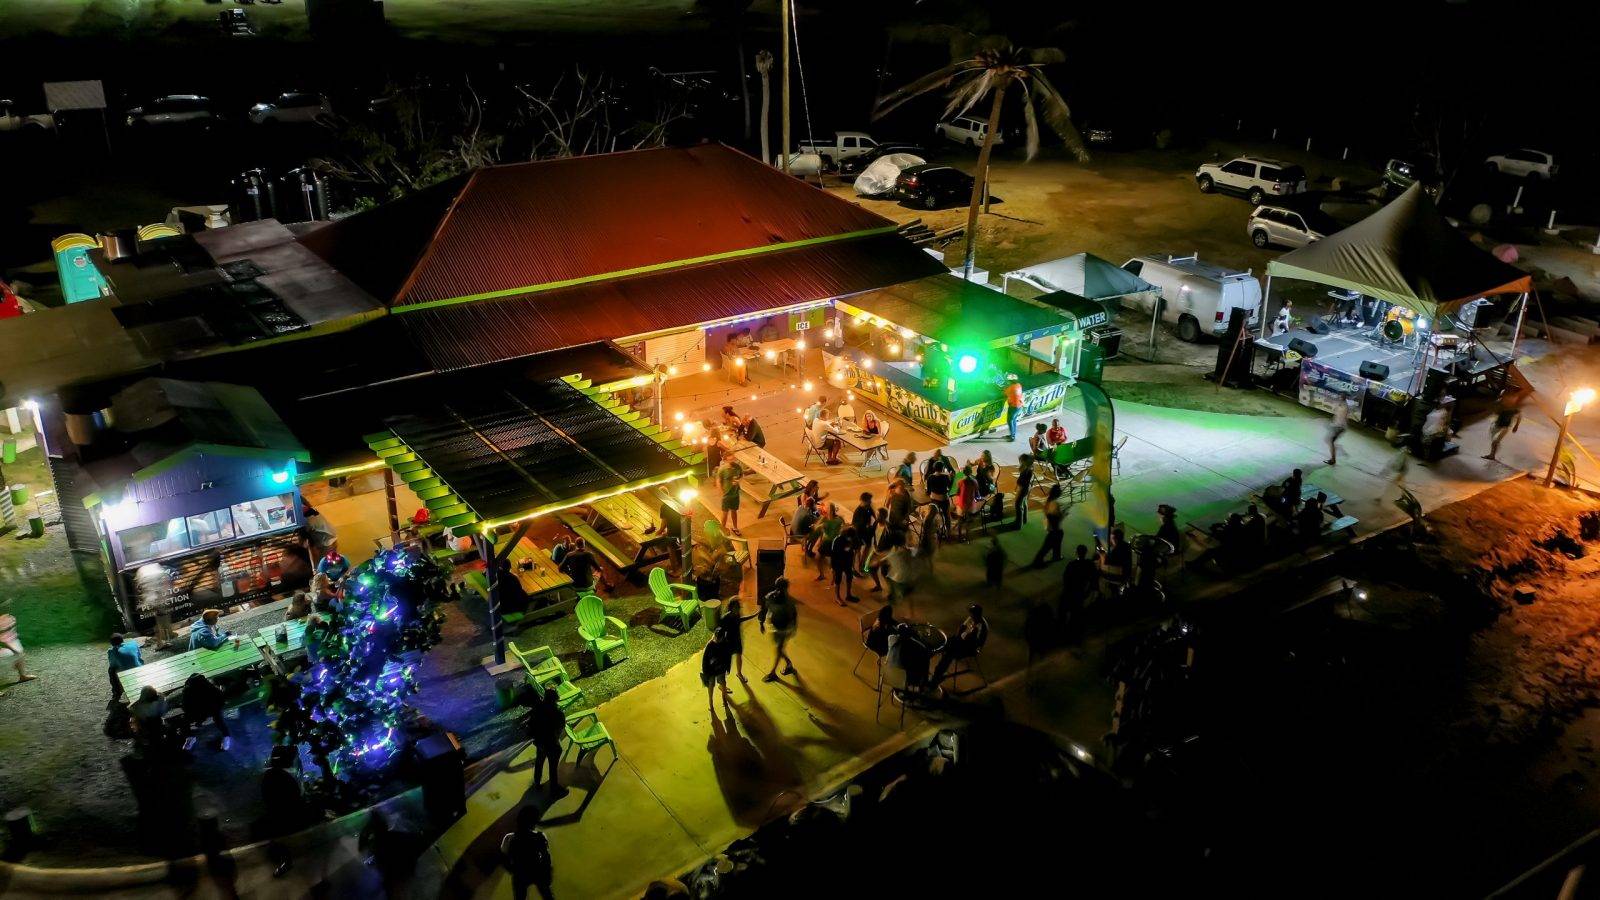 An aerial view of the party at night